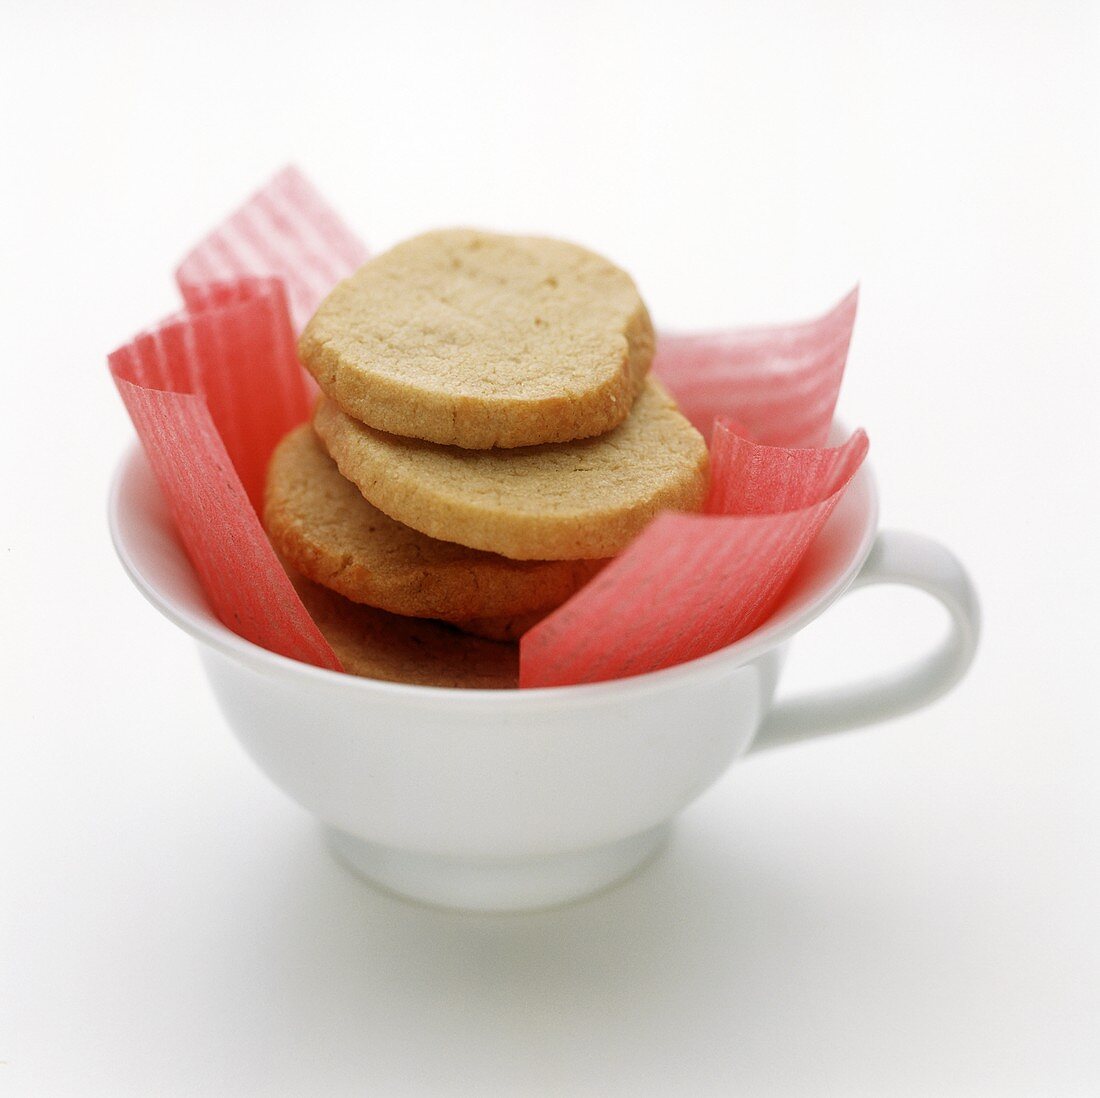 Lemon biscuits in teacup with pink paper